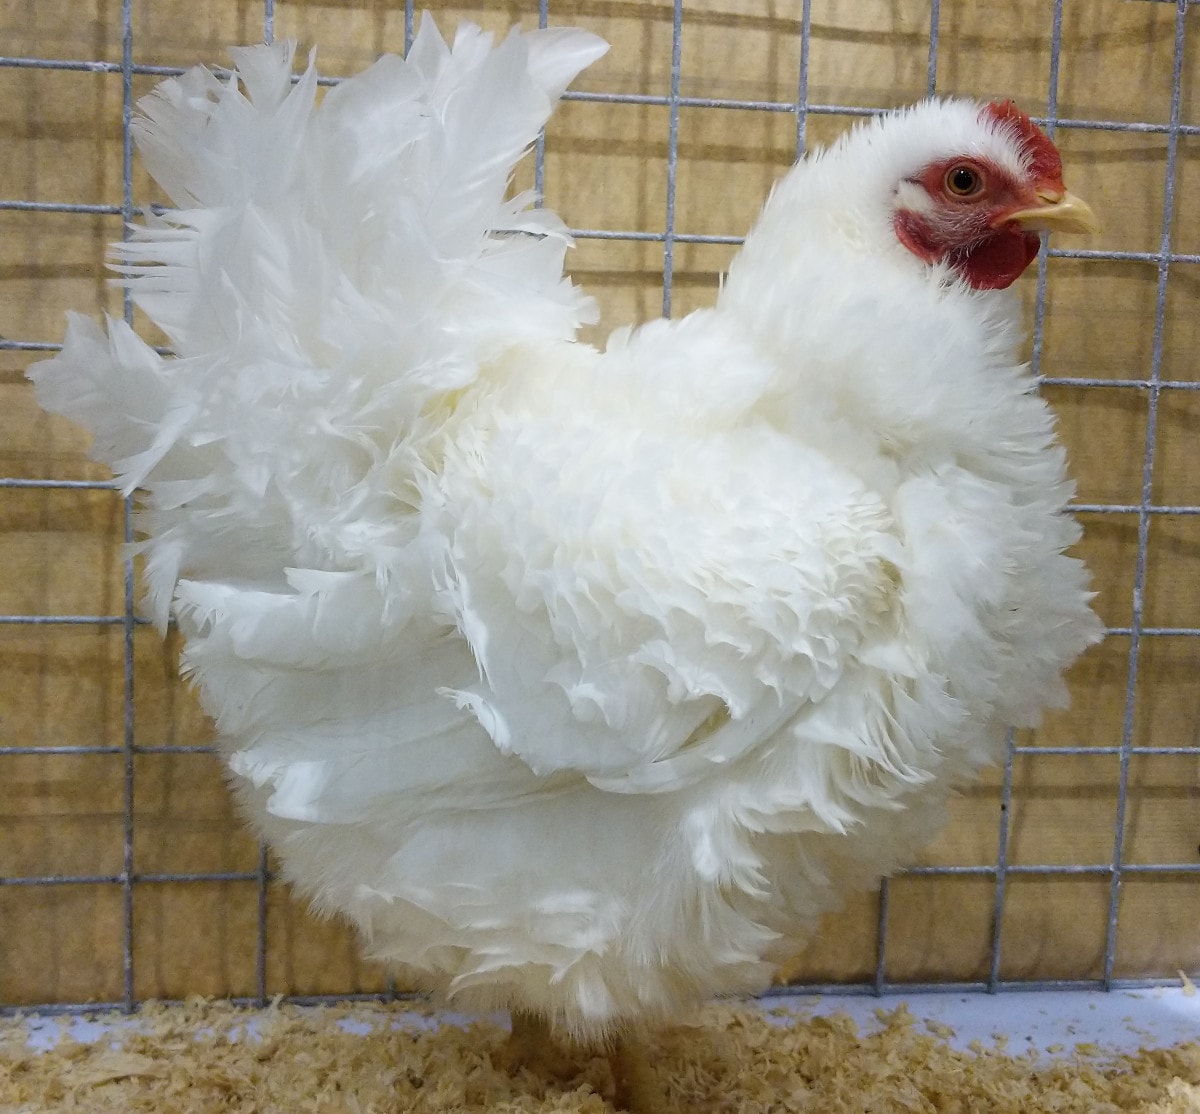 A frizzle chicken at a poultry show.